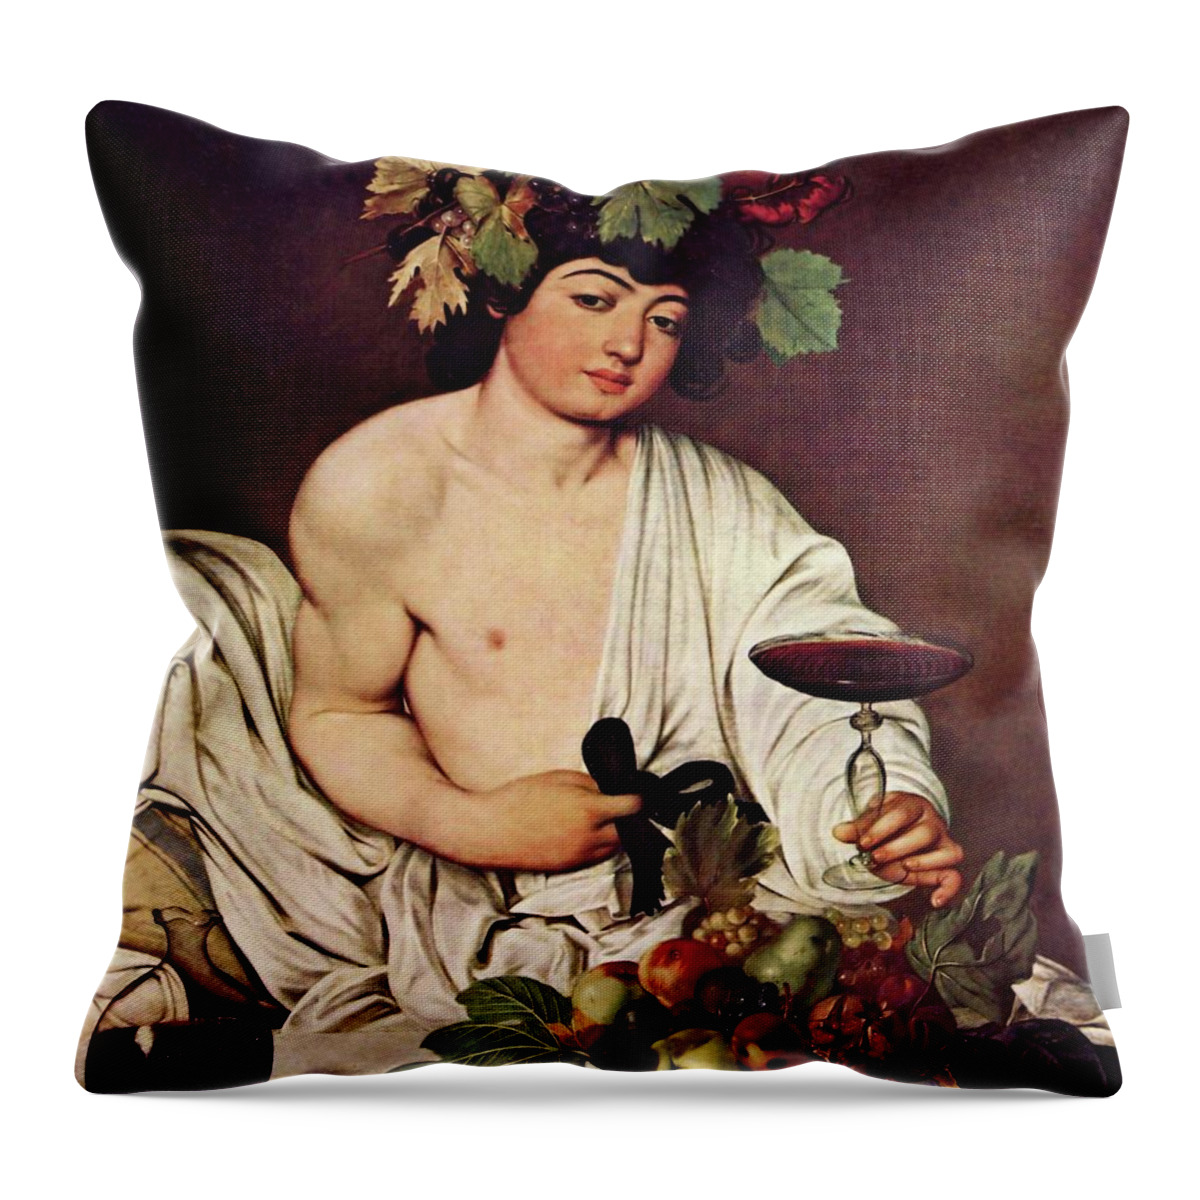 Bacchus Throw Pillow featuring the painting Bacchus by Michelangelo Caravaggio